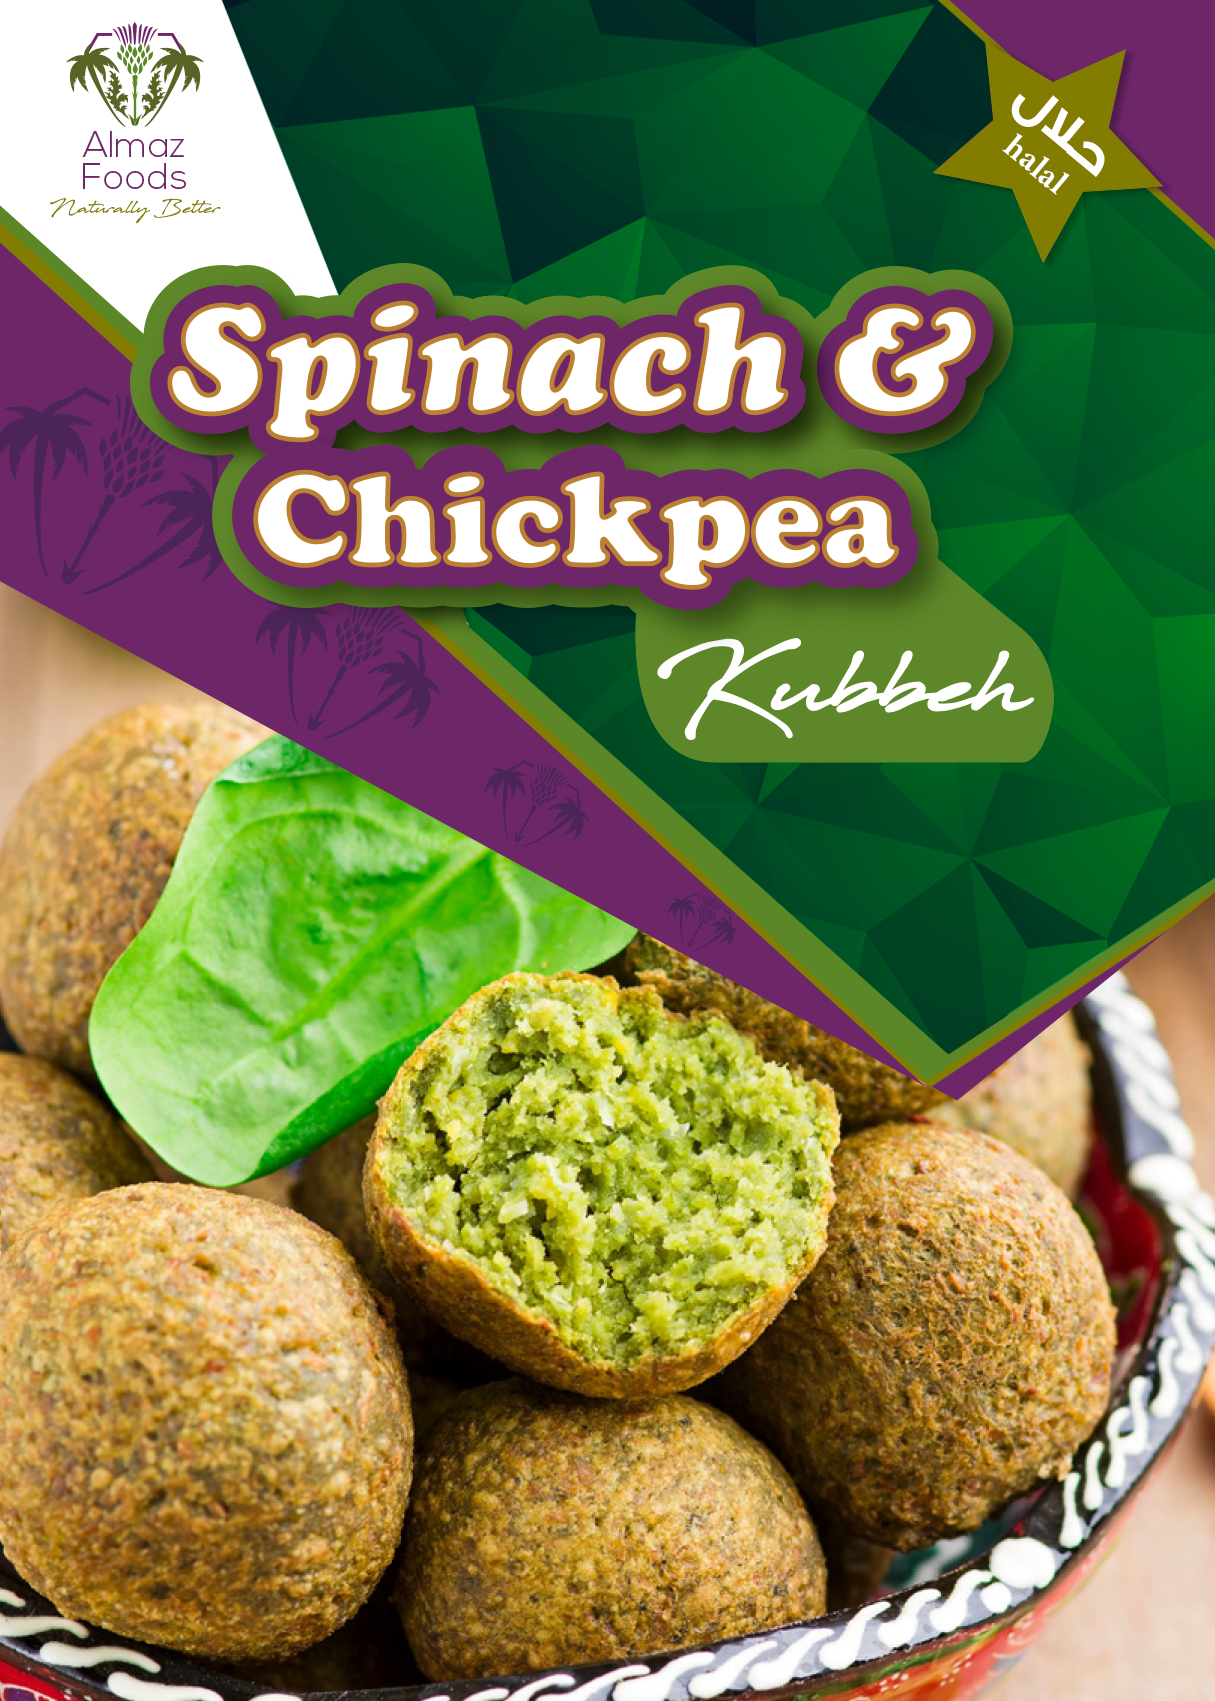 Spinach & Chickpea Kubbeh